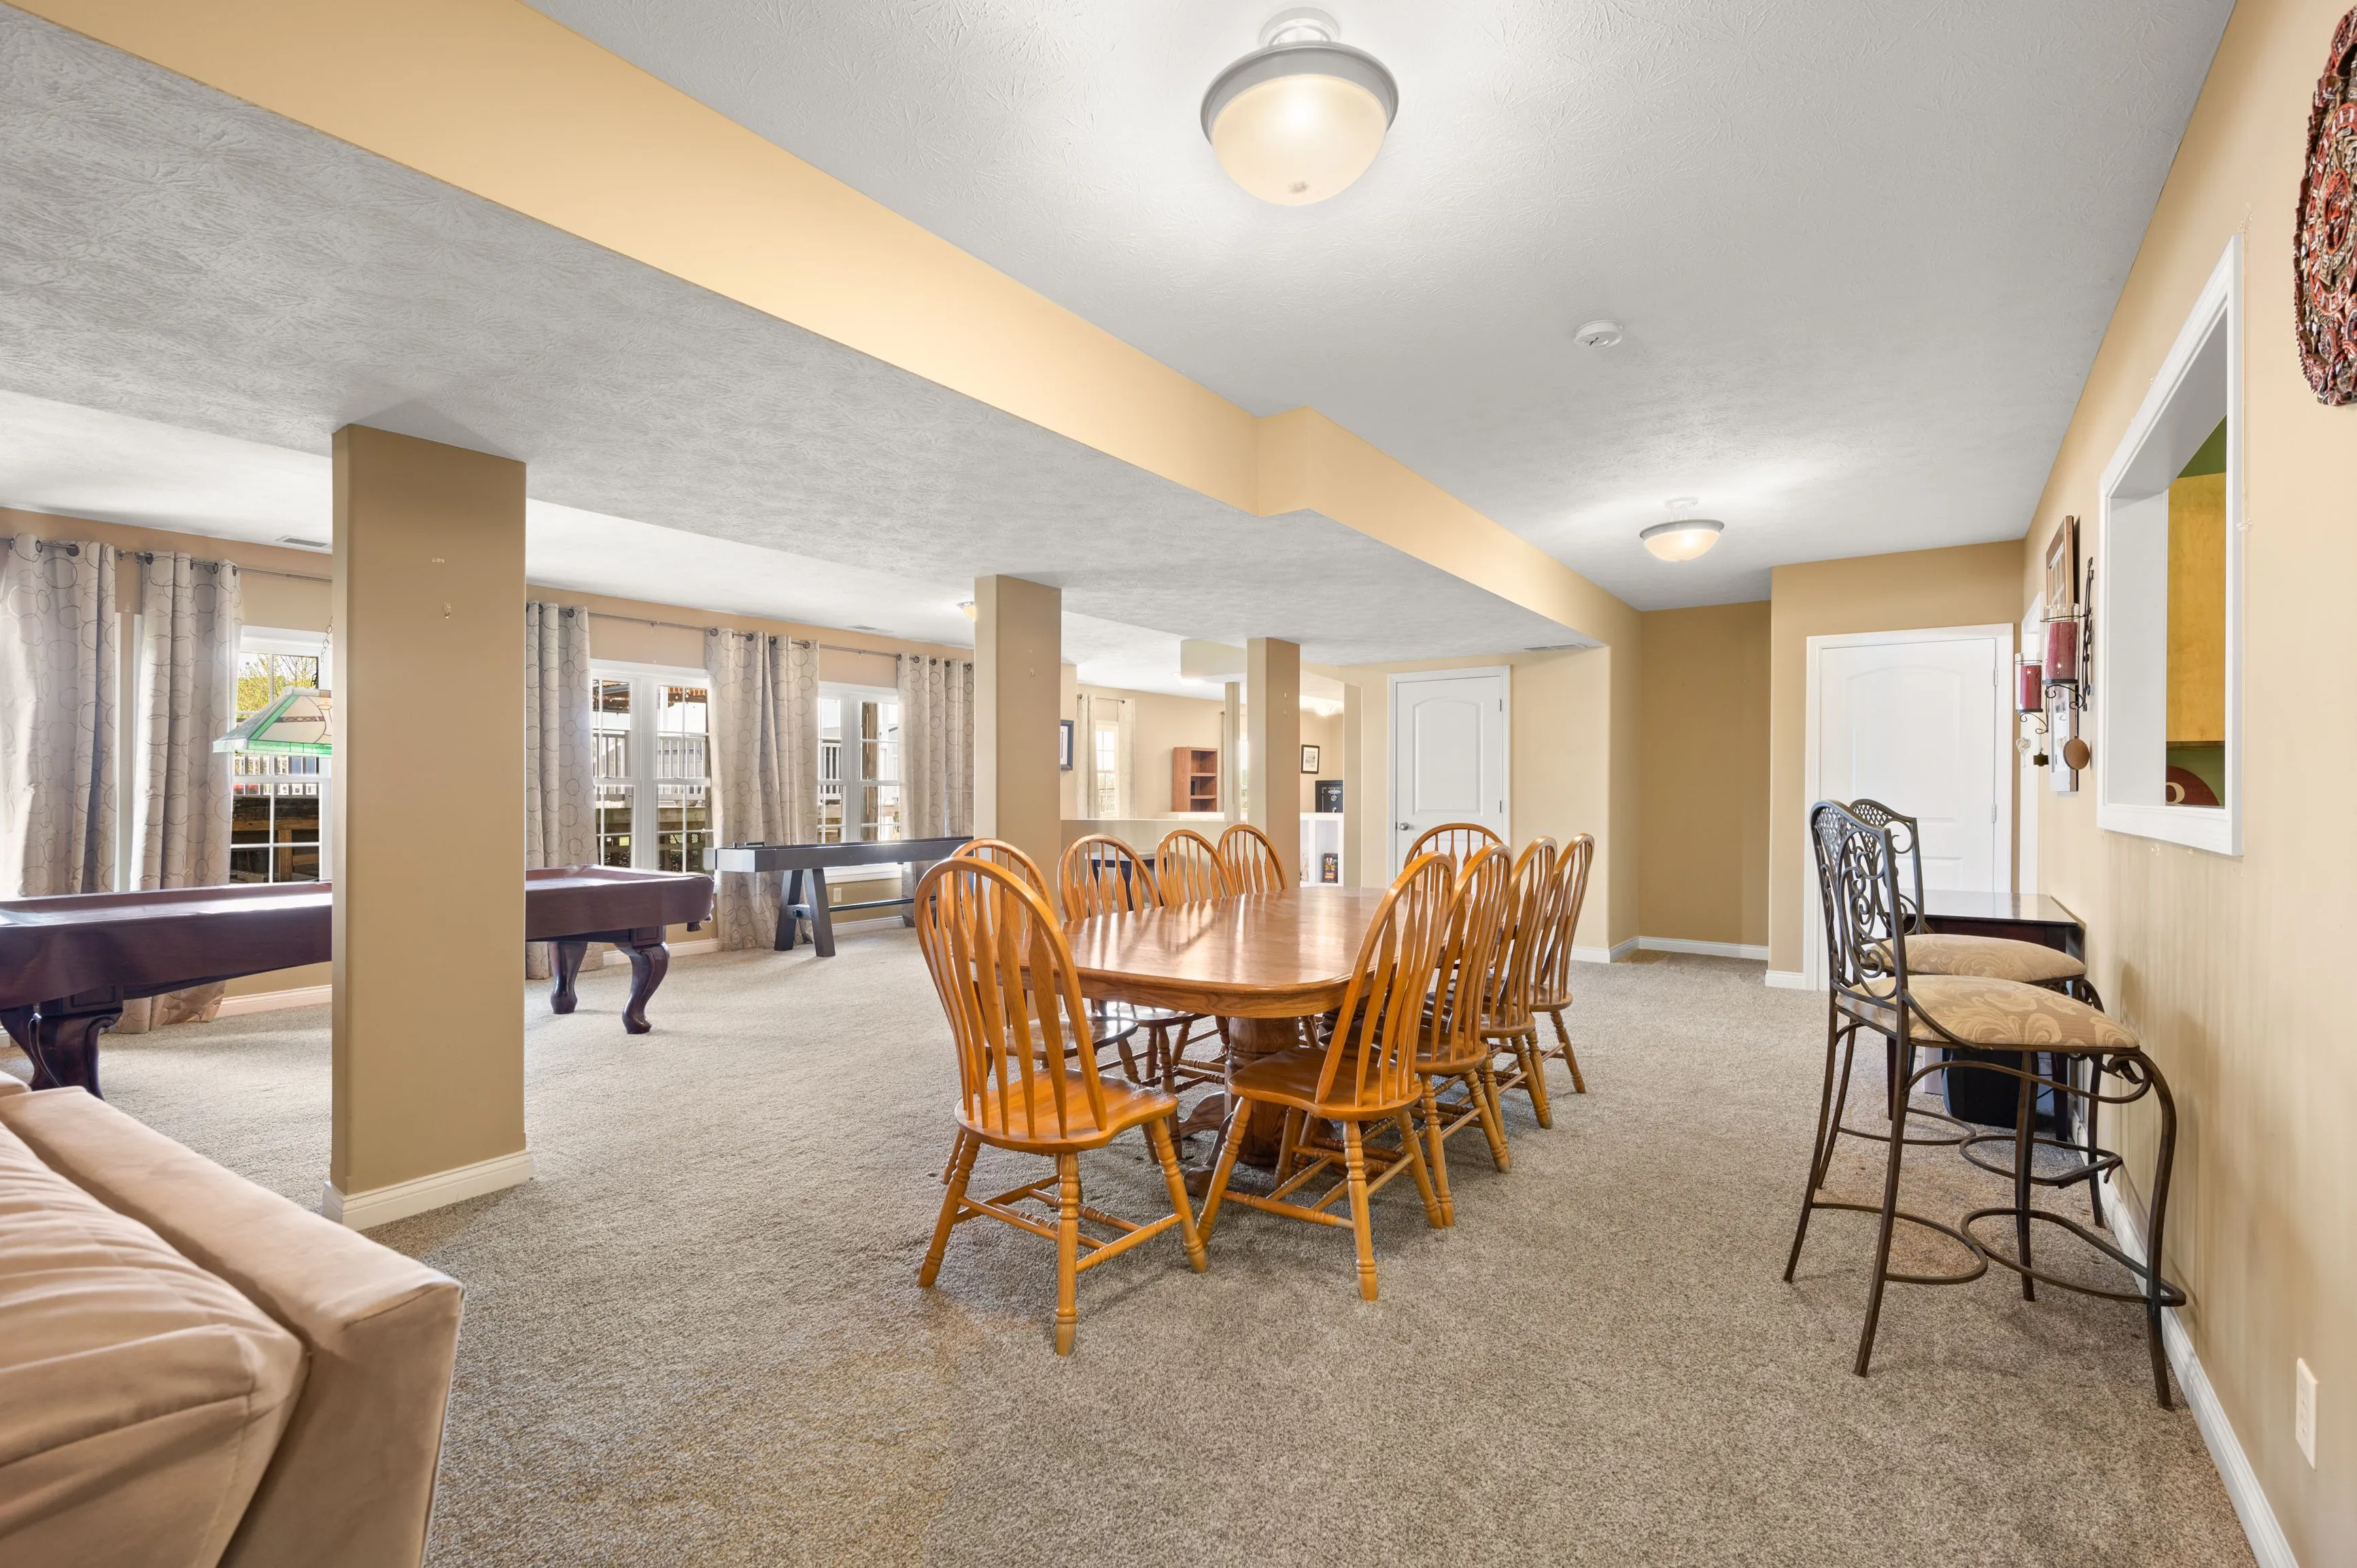 Spacious basement interior with dining area, pool table, and comfortable seating under warm lighting.